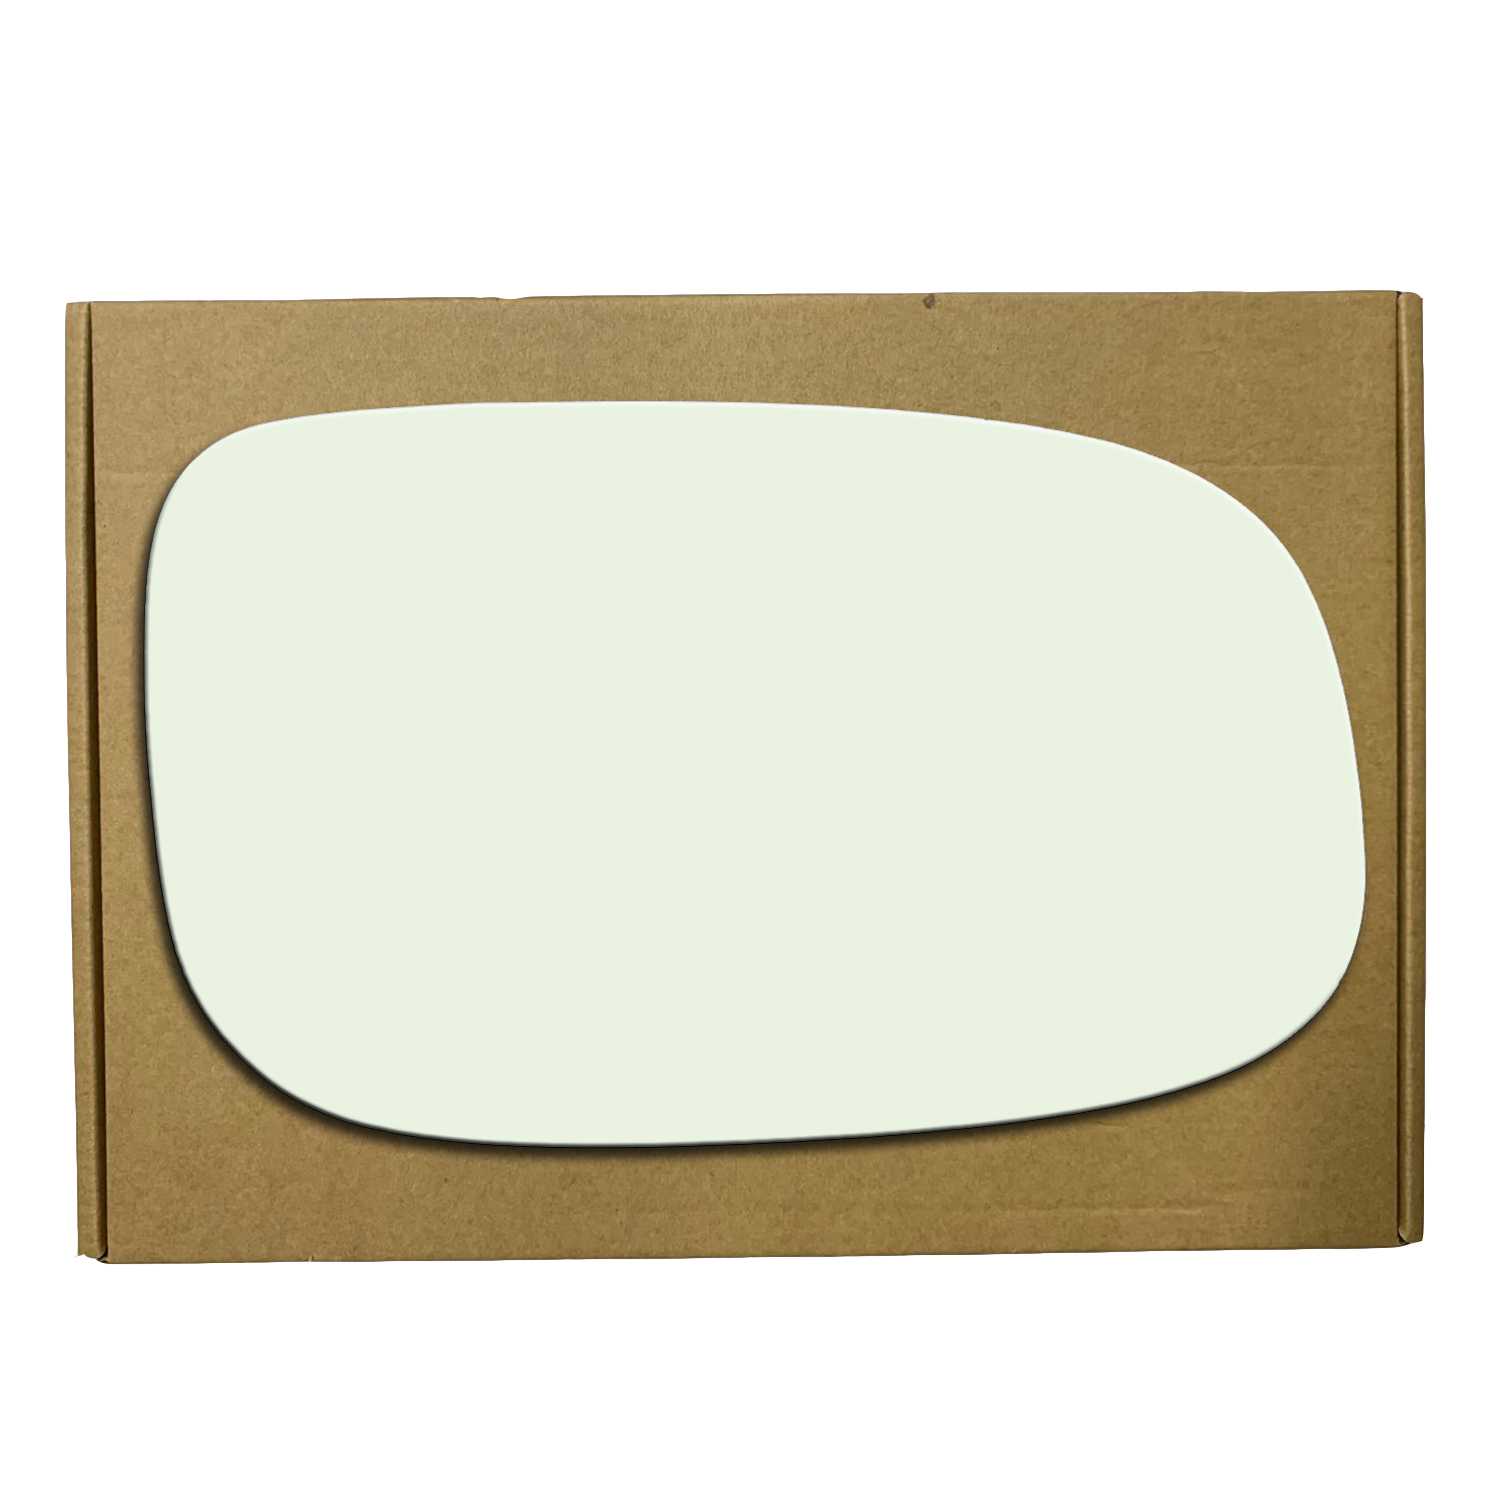 WLLW Replacement Mirror Glass for 2007-2014 Volvo C30/C70/S40/S60/S80/V50/V70, Driver Left Side LH/Passenger Right Side RH/The Both Sides Flat Convex M-0082